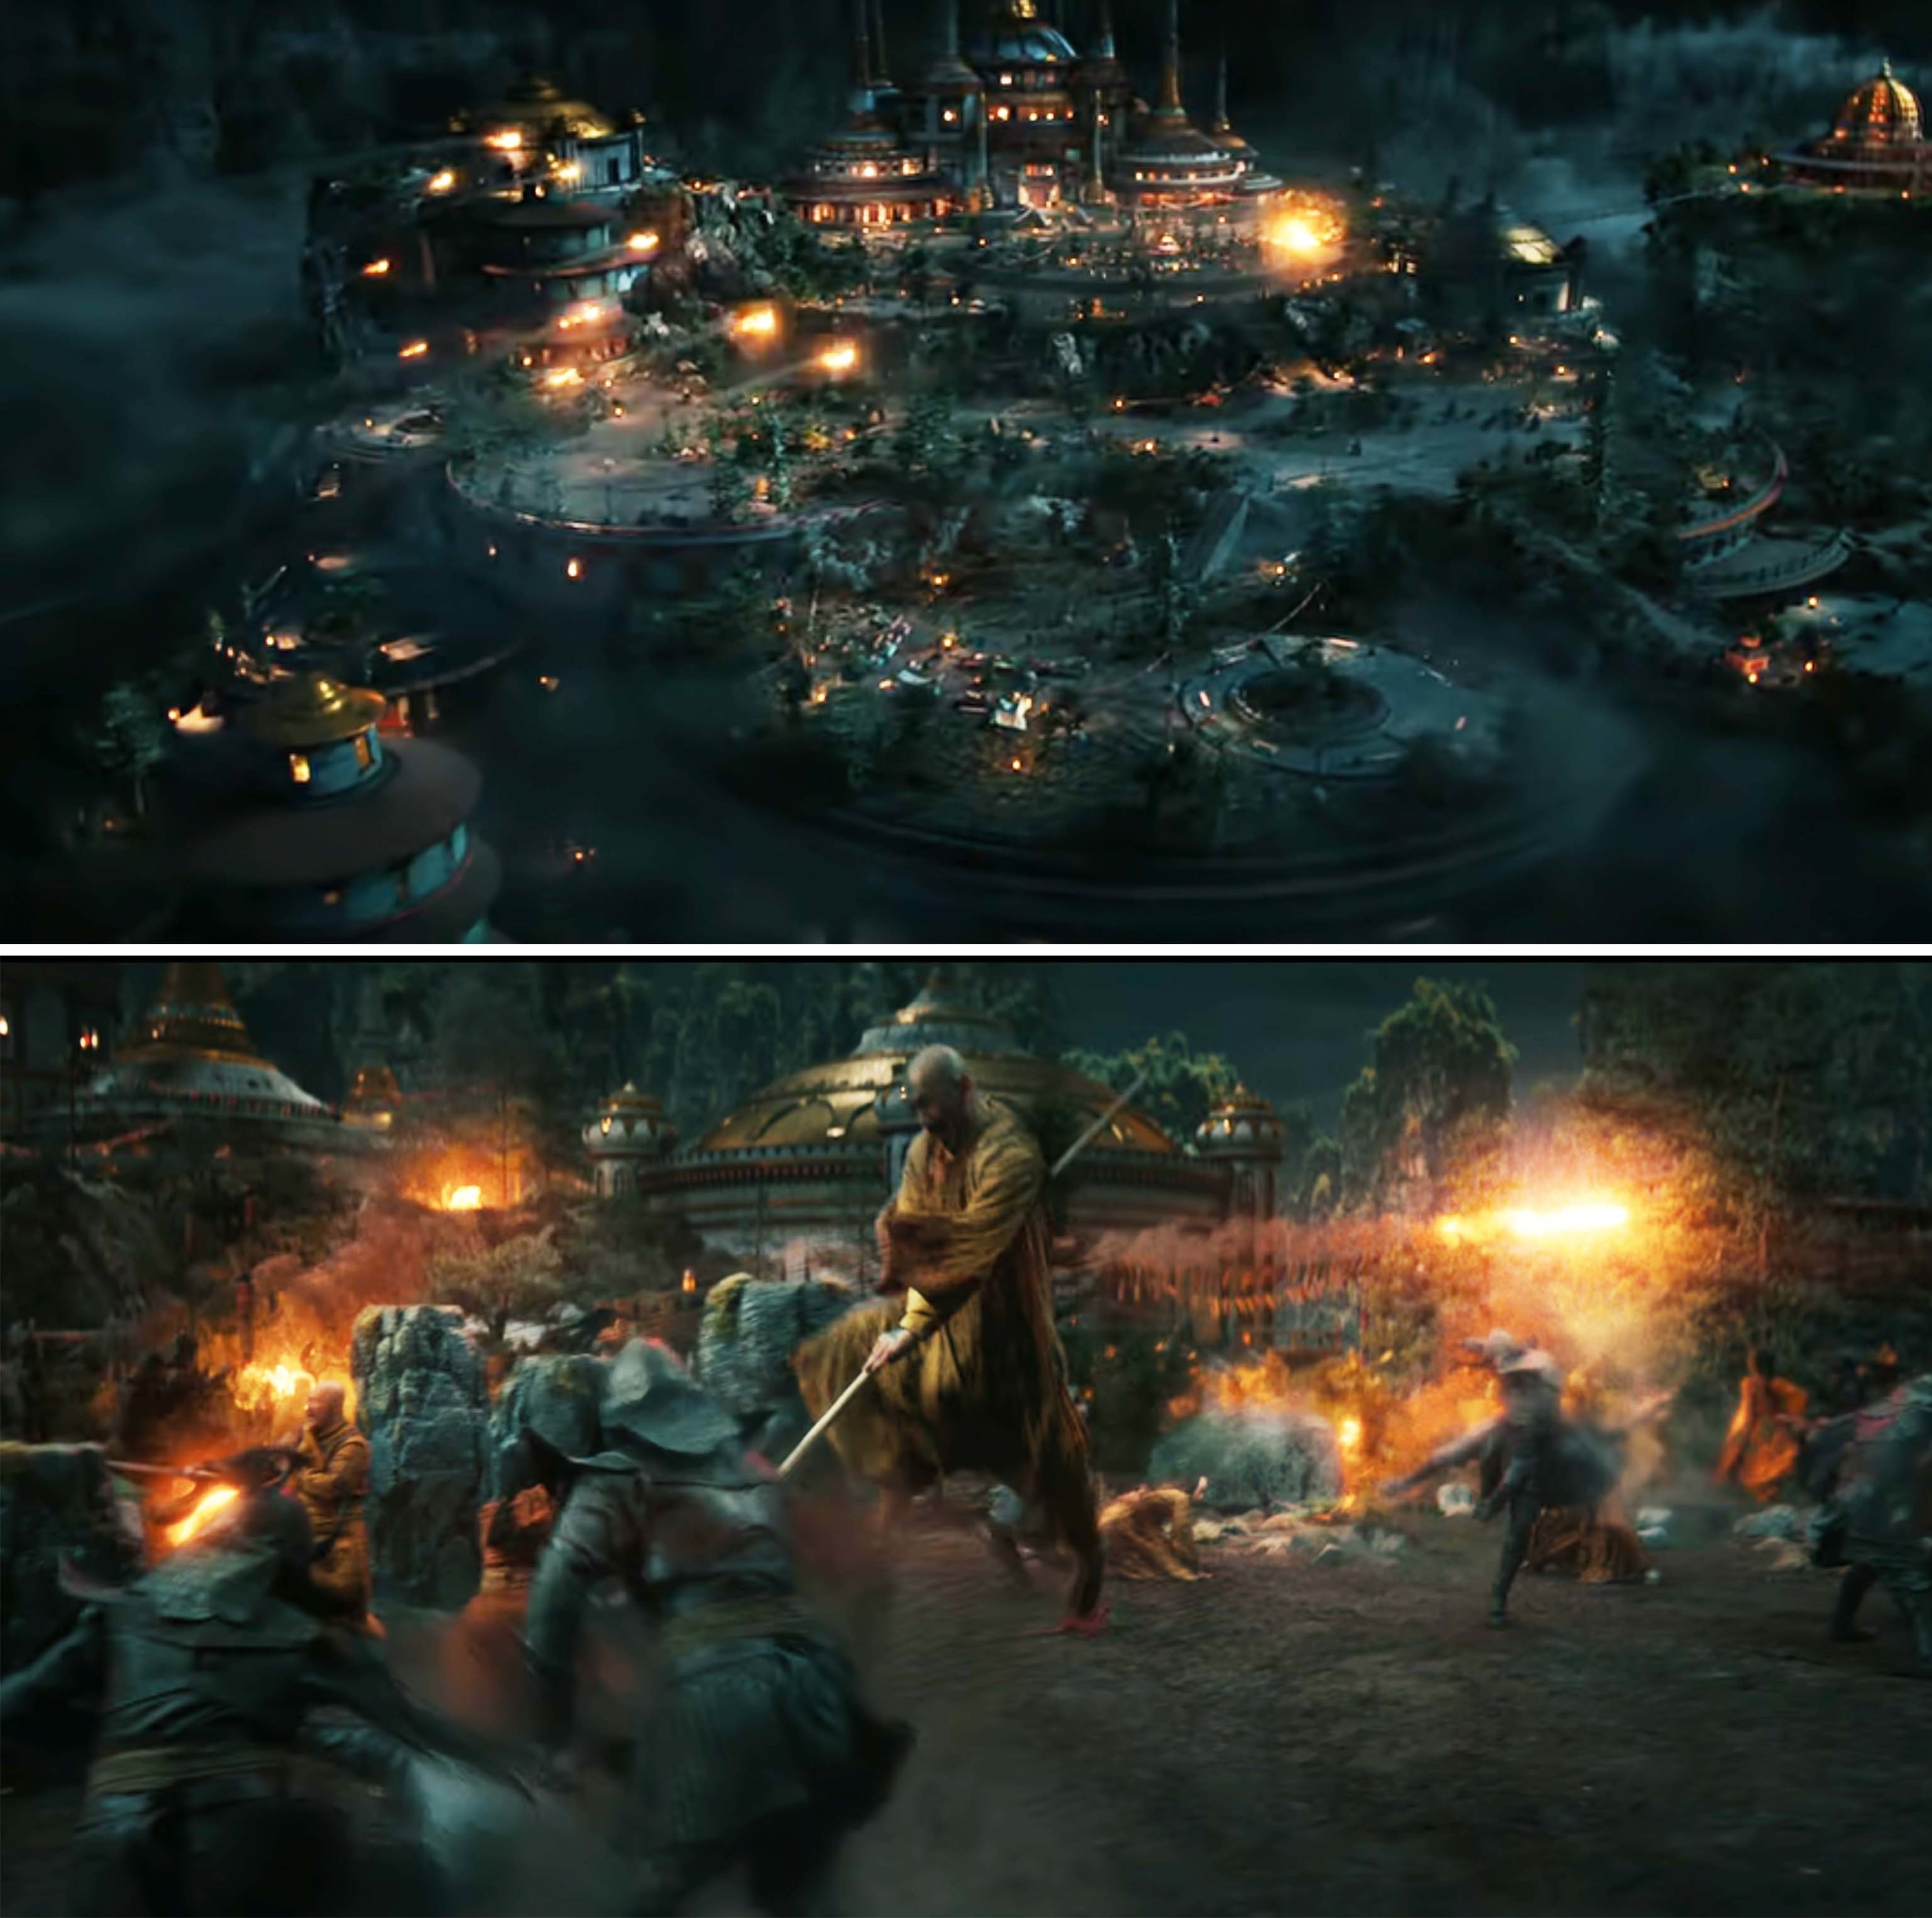 Stills from the live-action Avatar the Last Airbender, upper image depicting a panoramic night view of a lit-up castle village, lower image showing a battle scene